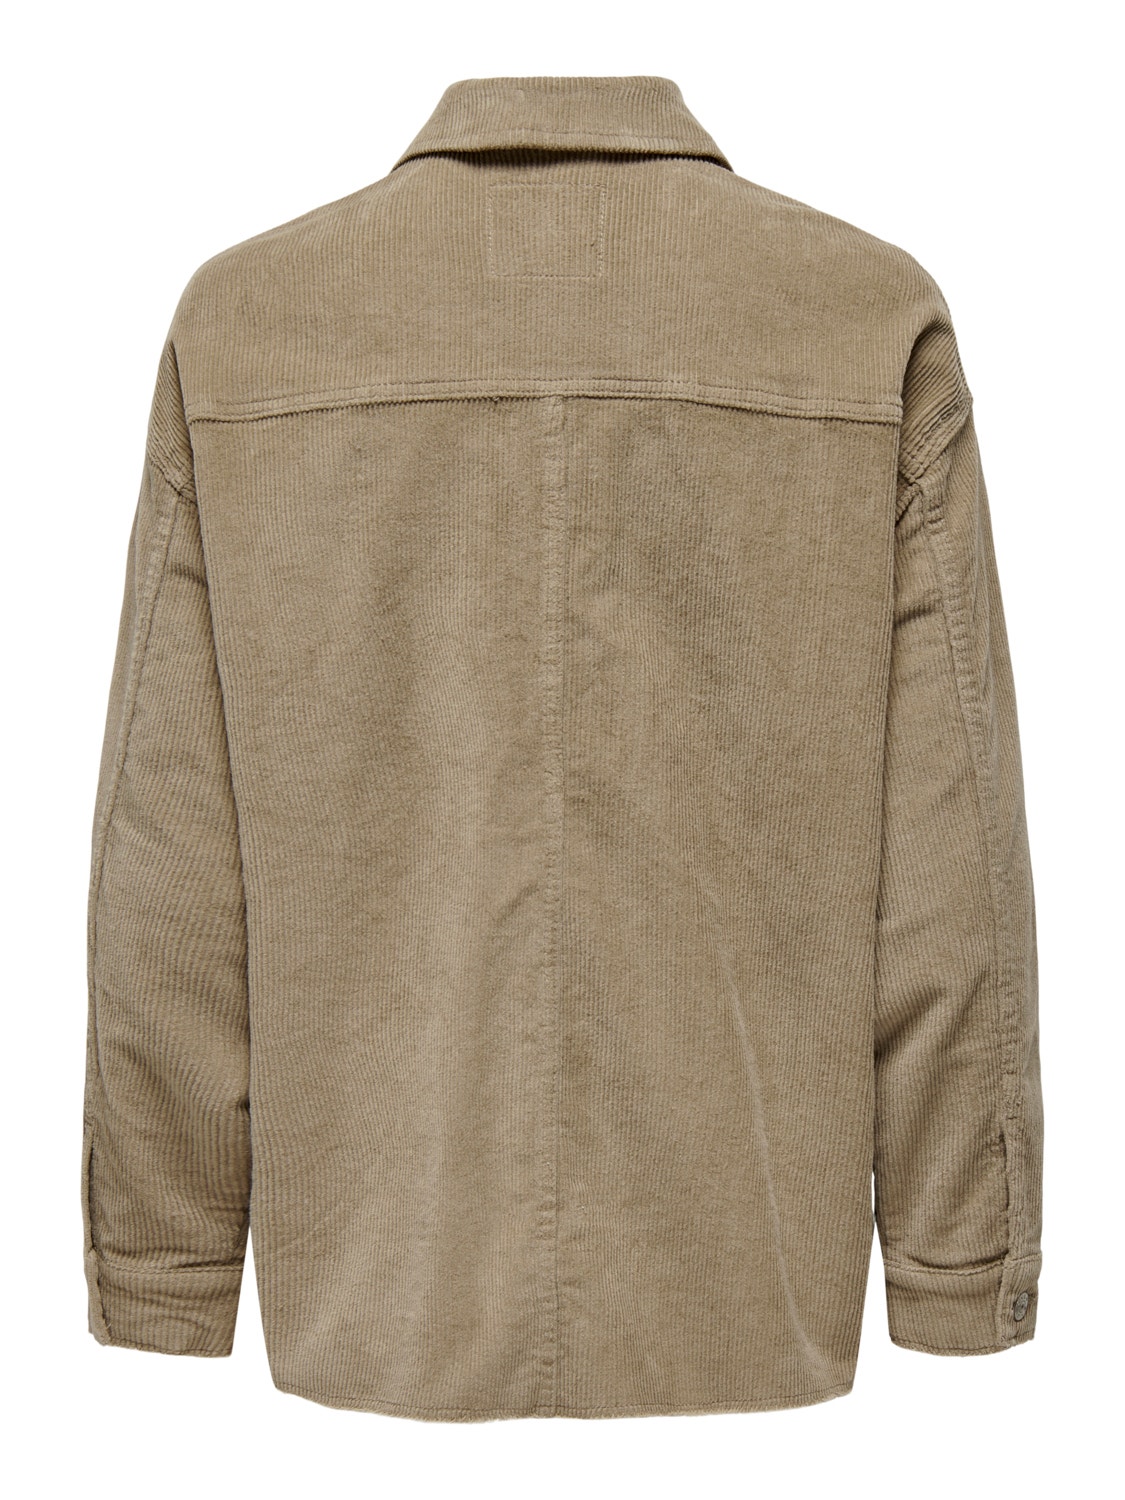 ONLY Spread collar Jacket -Weathered Teak - 15298655